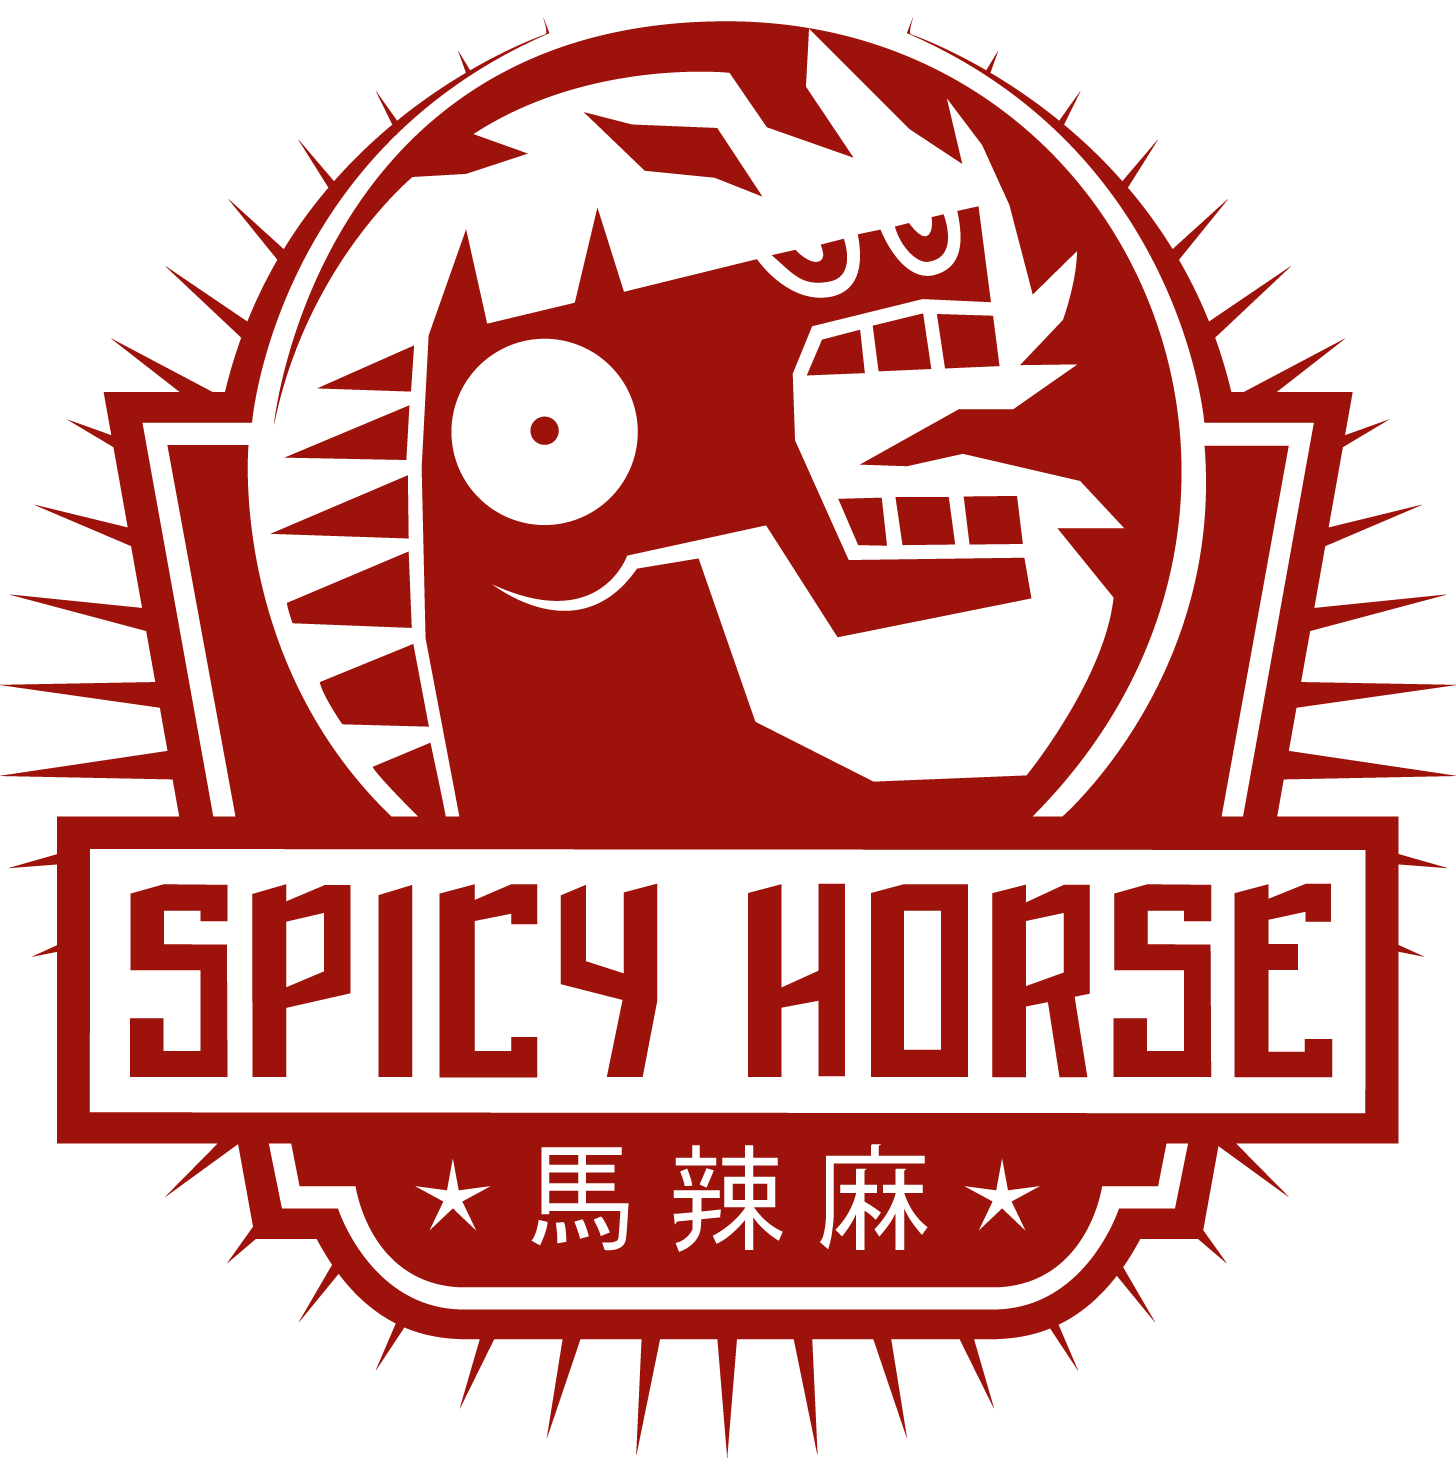 Spicy Logo - Spicy logo png 6 » PNG Image